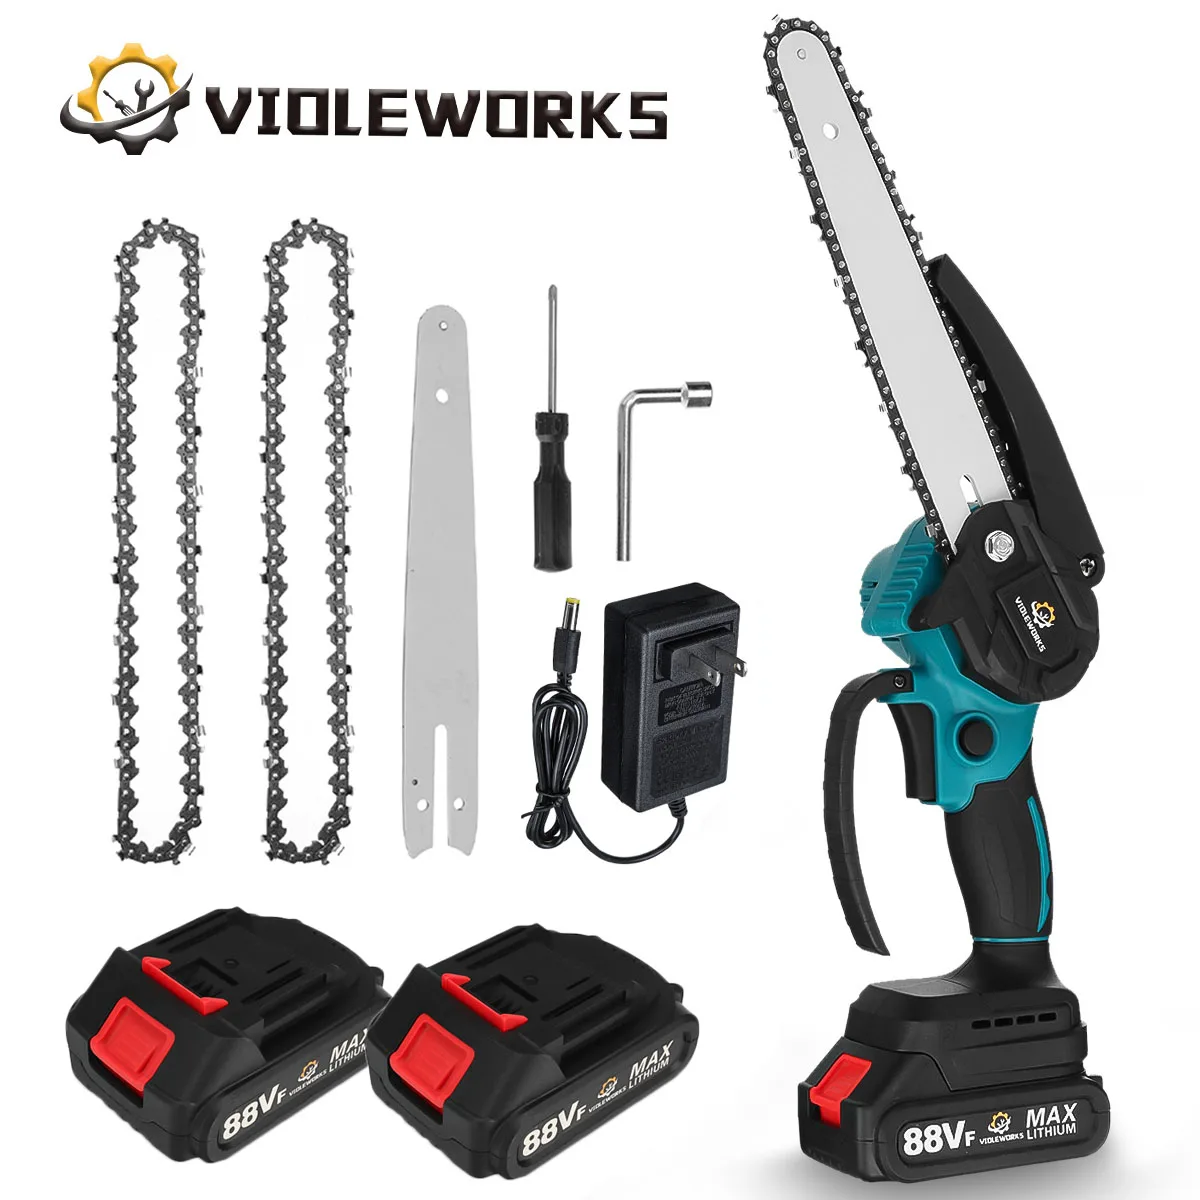 

VIOLEWORKS 8 inch Brushless Chainsaw 3000W Electric Chain Saw Garden Branch Tree Pruning Power Tool For Makita 18V Battery